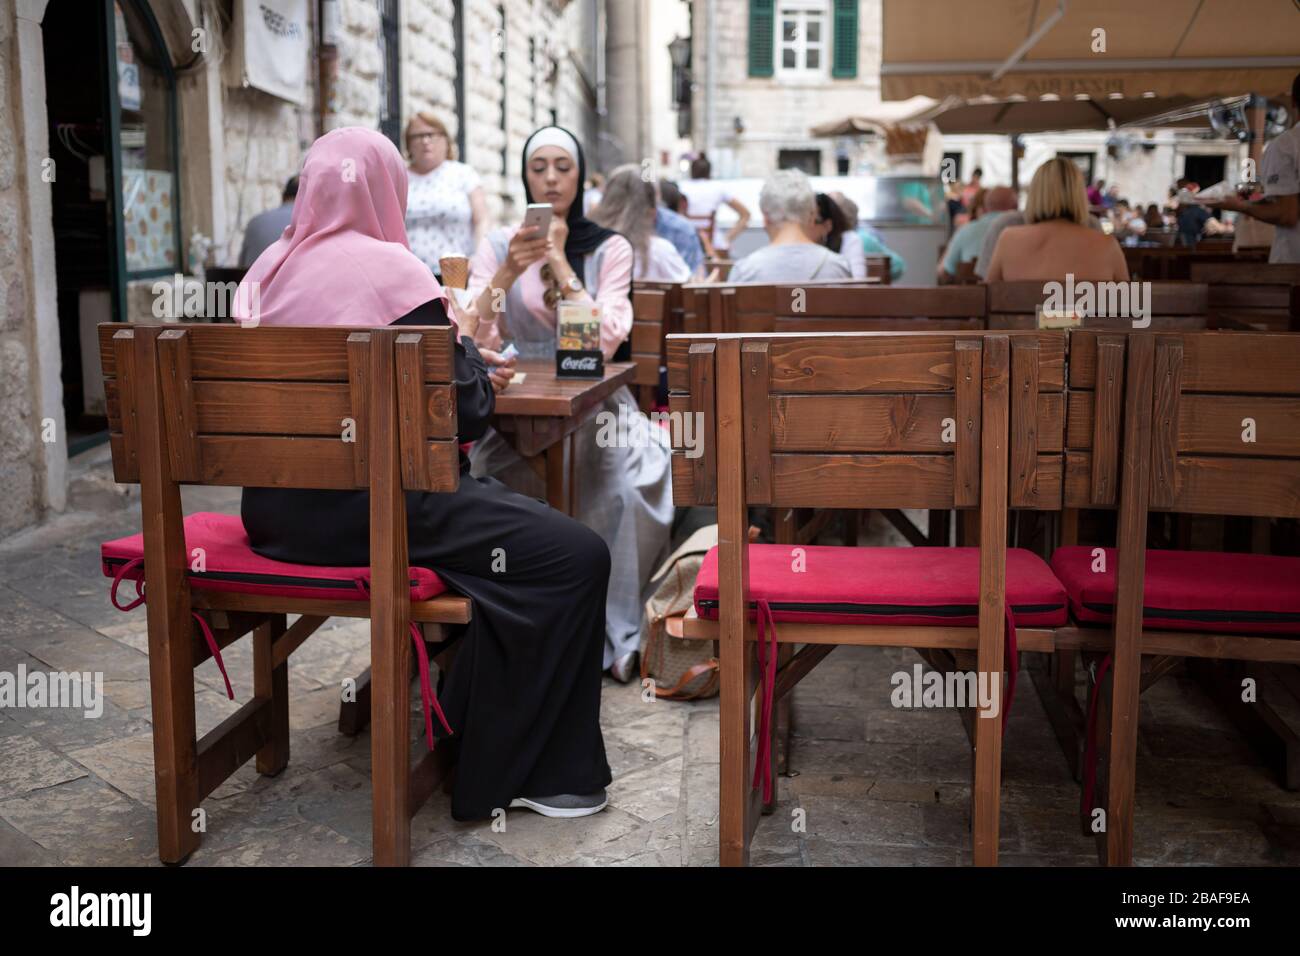 Montenegro, Sep 17, 2019: Outdoor cafe with guests in Kotor Old Town Stock Photo